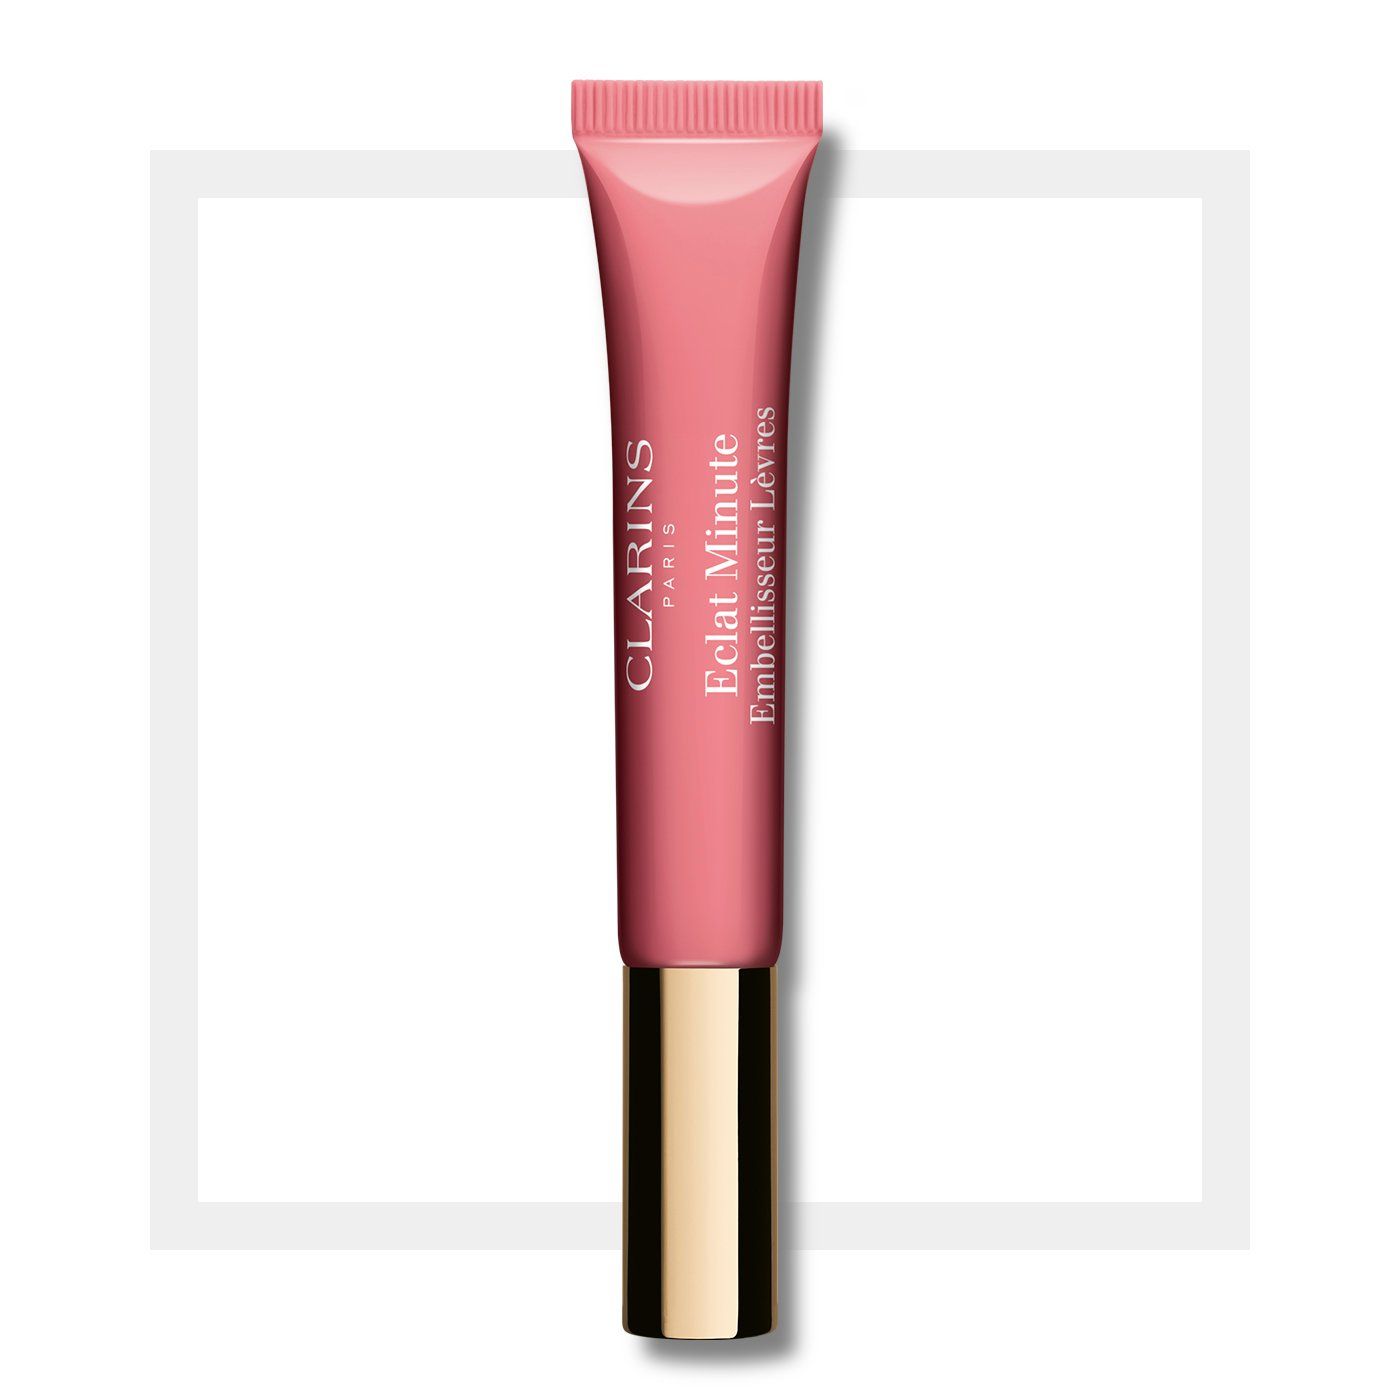 Clarins Instant Light Natural Lip Perfector 12ml - 01 Rose Shimmer